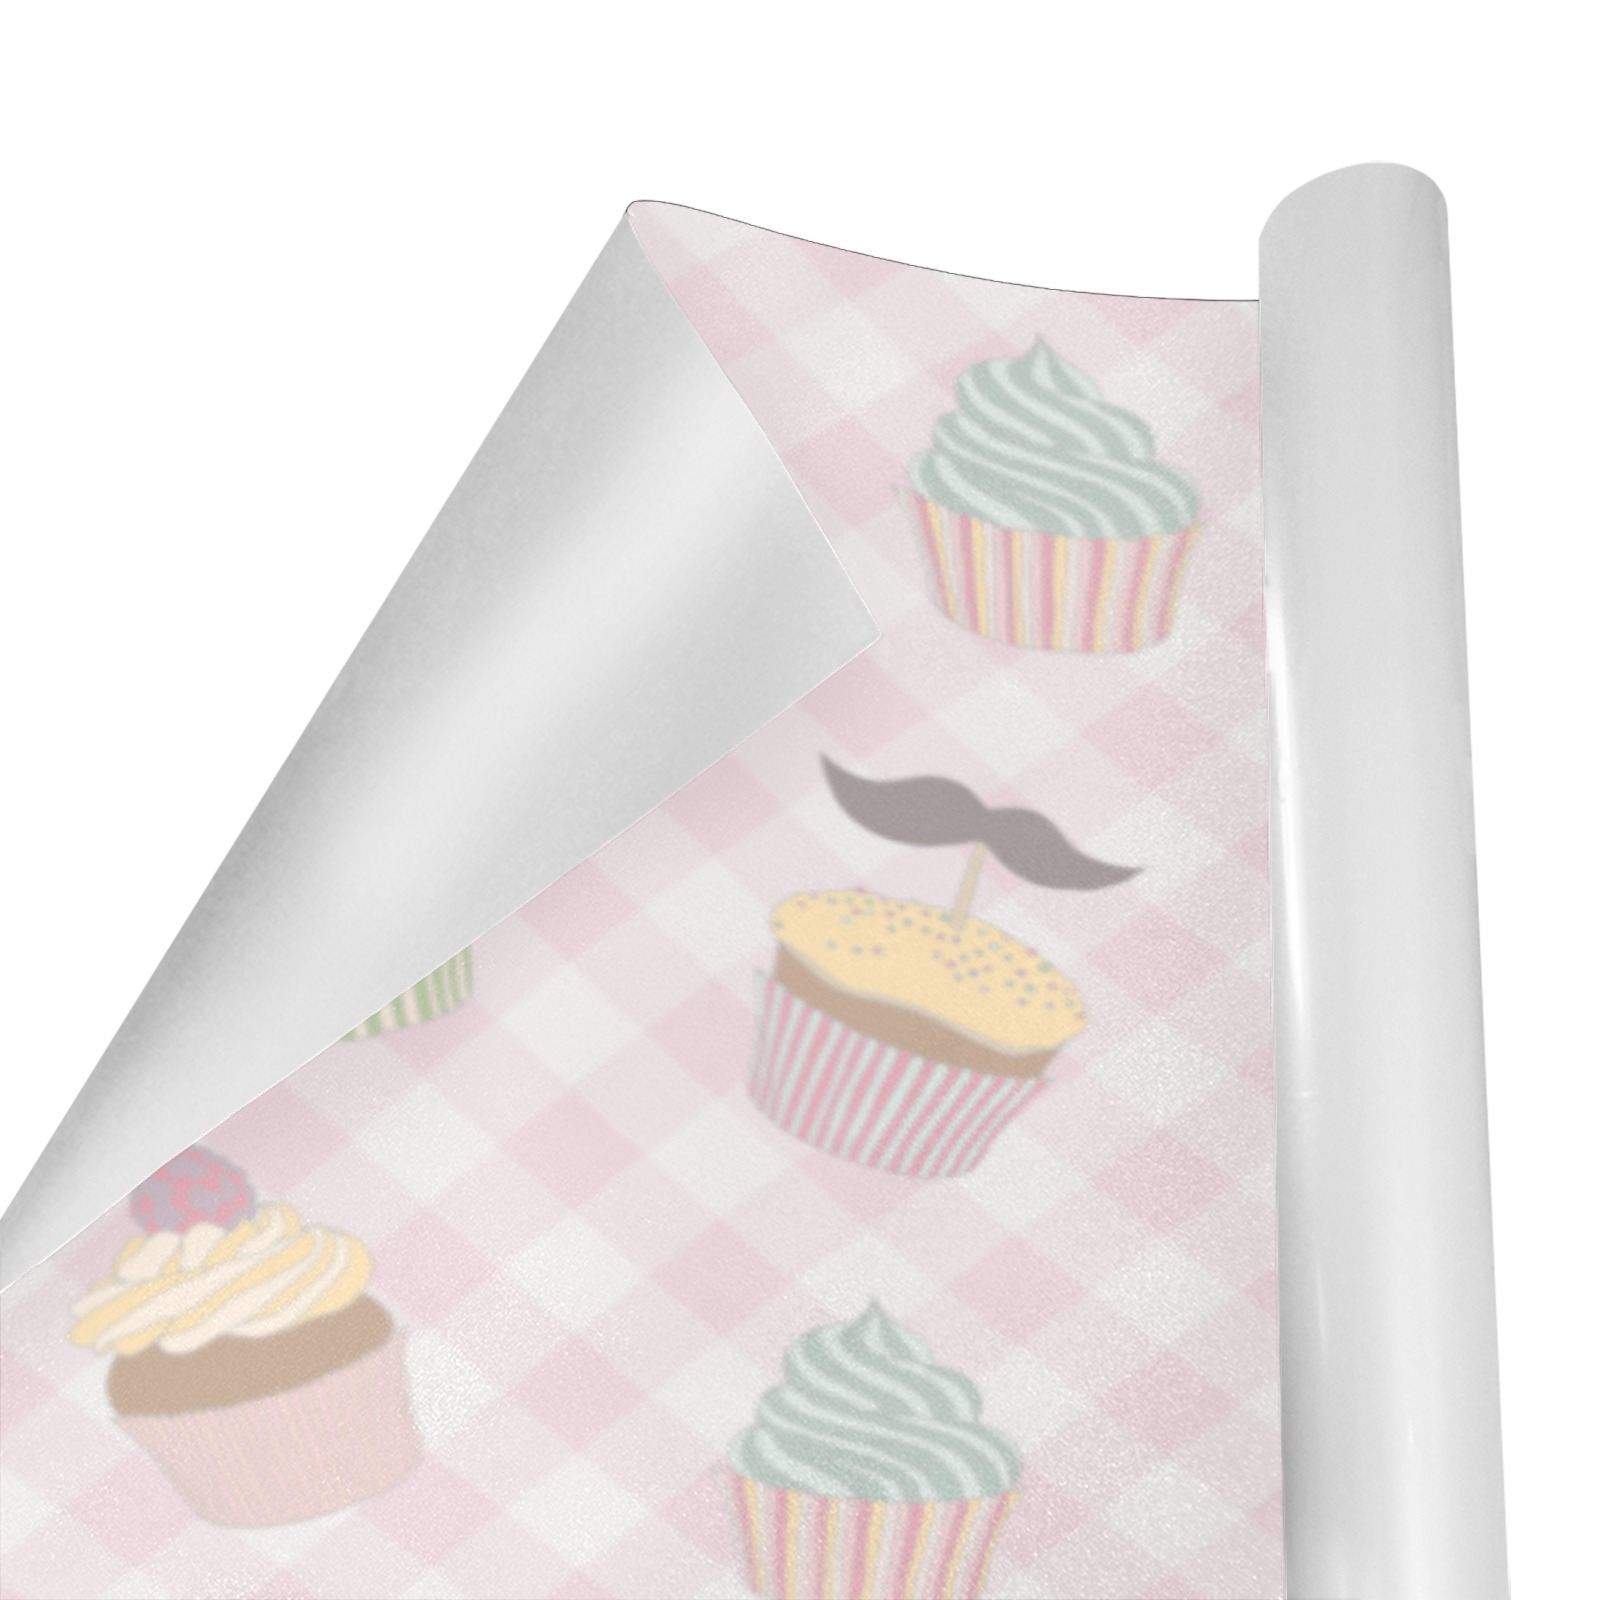 Cupcakes Gift Wrapping Paper 58"x 23" (3 Rolls)